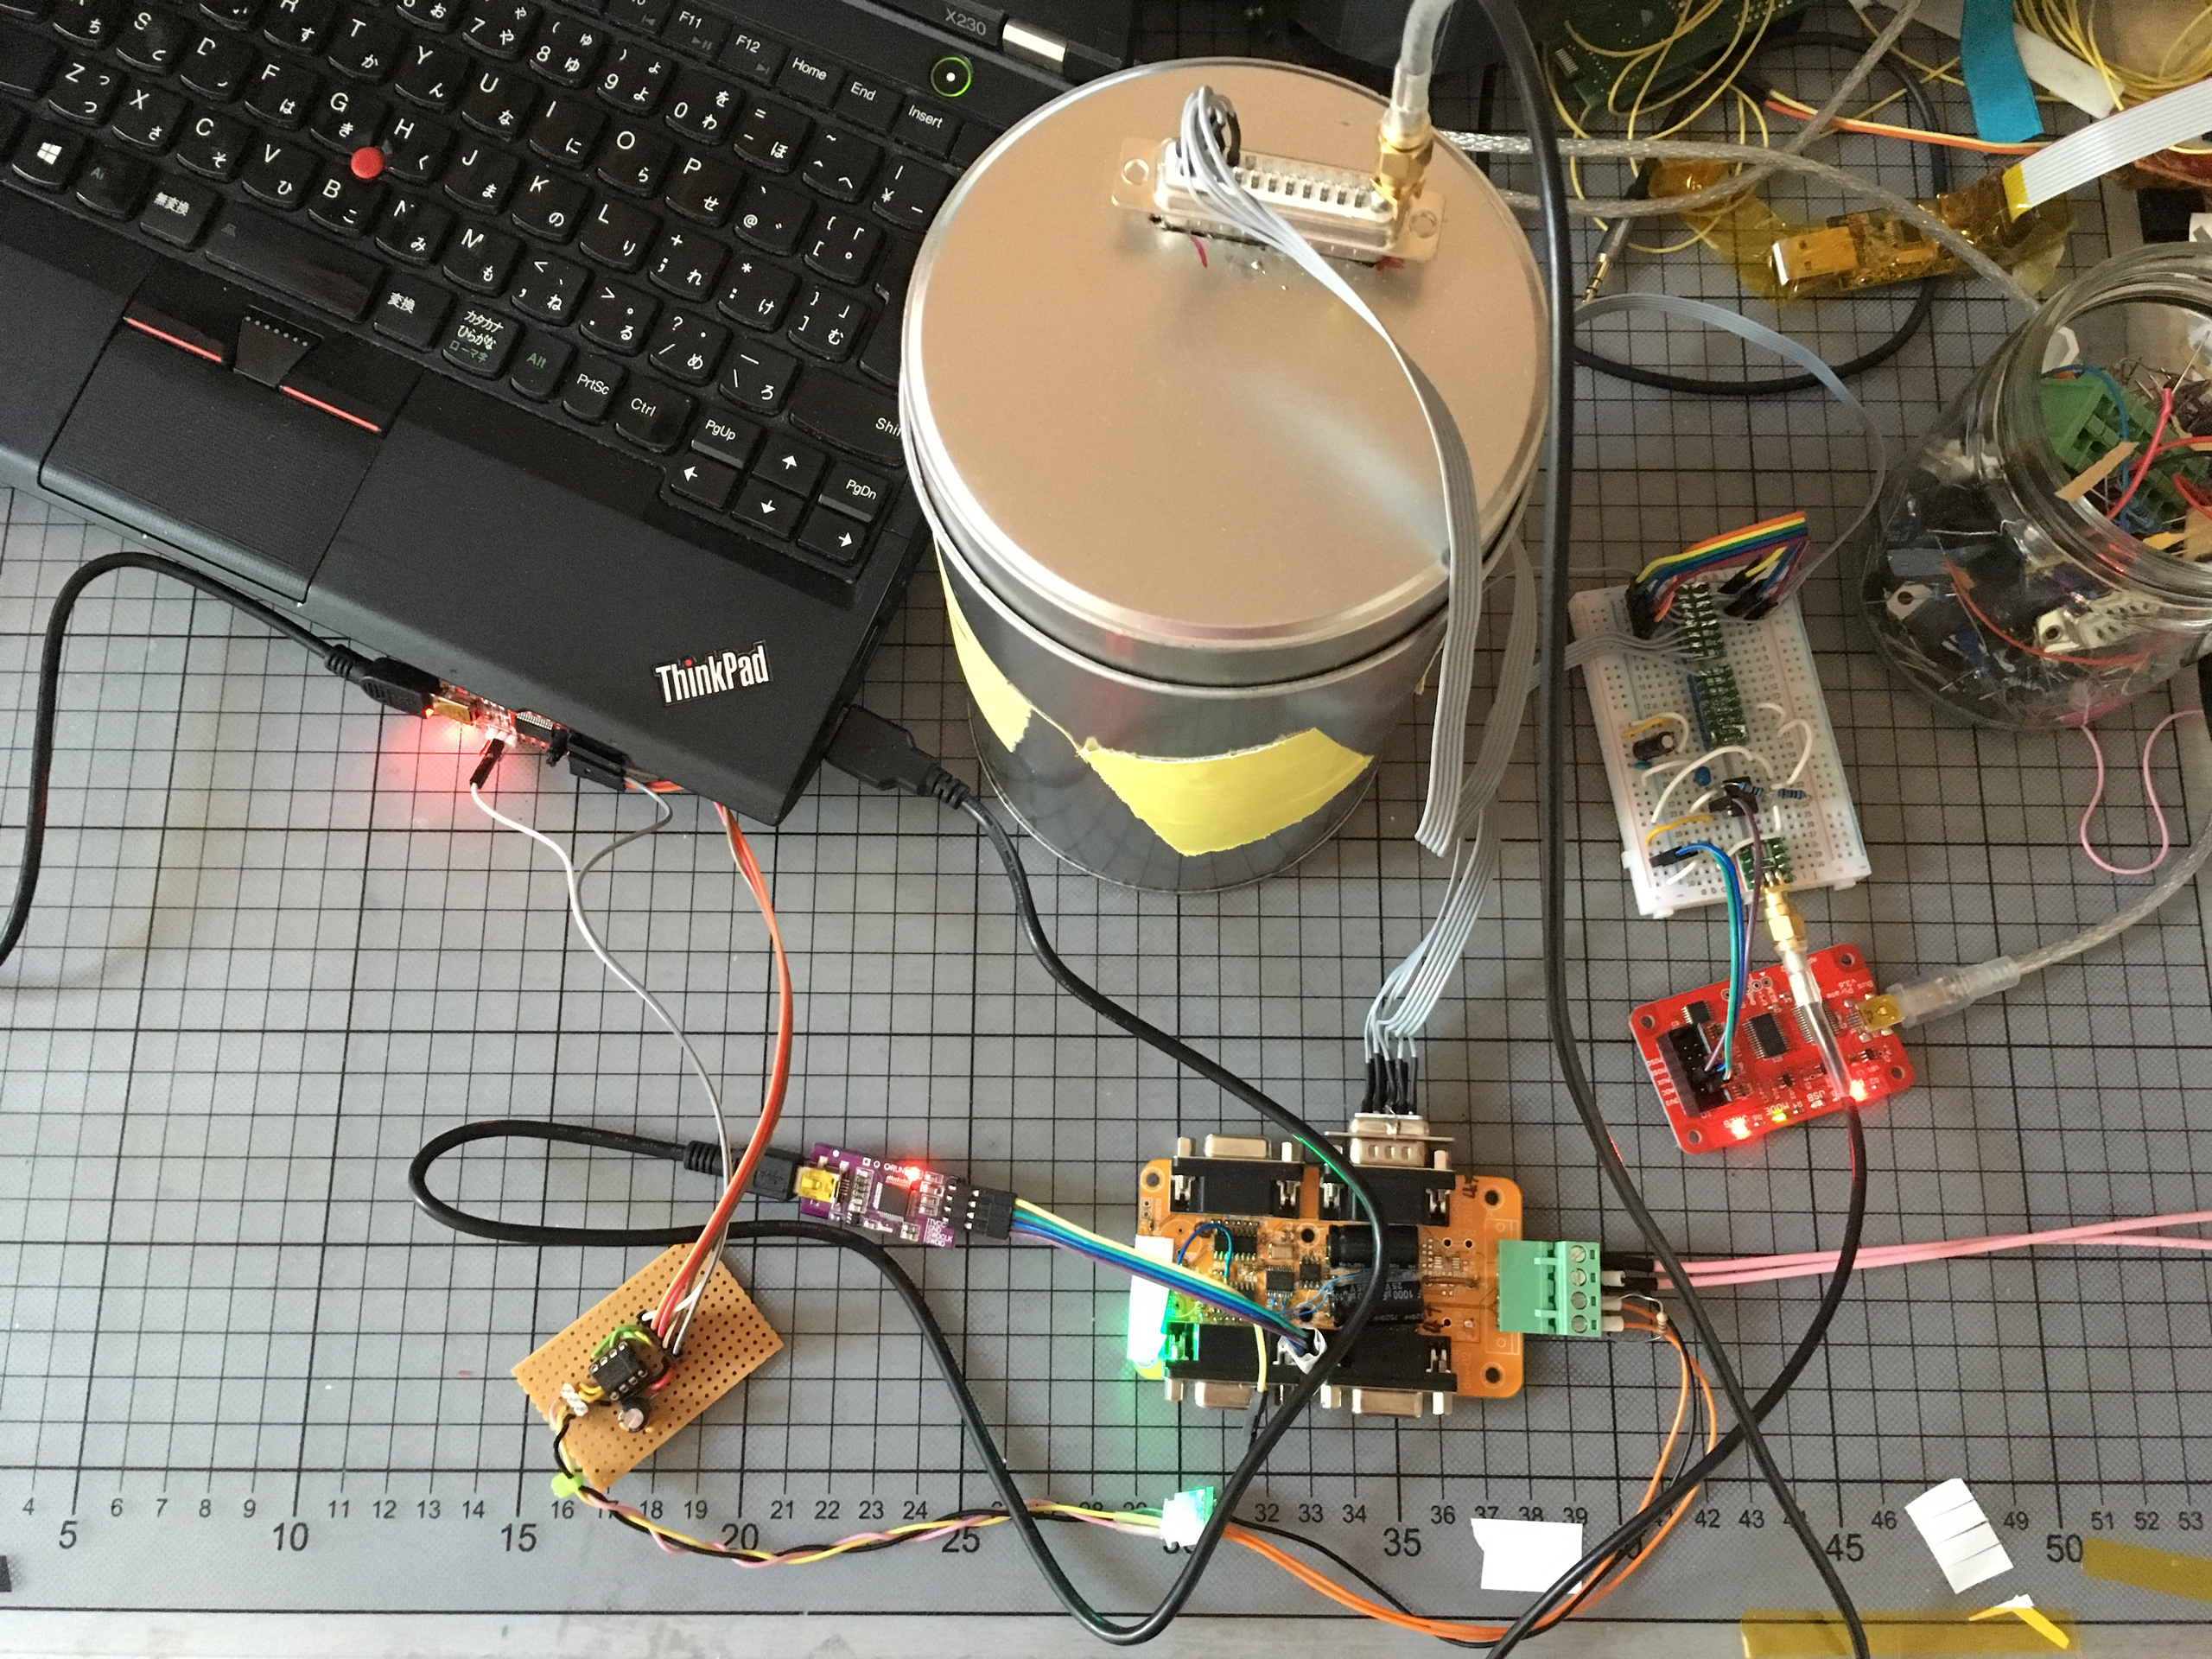 The led measurement setup consists of several PCBs and a
    breadboard linked with a bunch of wires and a big tin can to shield the LEDs and the photodiode. A large sub-D
    connector is put into the top of the tin can as a feed-through for the LED tape's control signals and the
    photodiode signal. In the background the control laptop is visible.